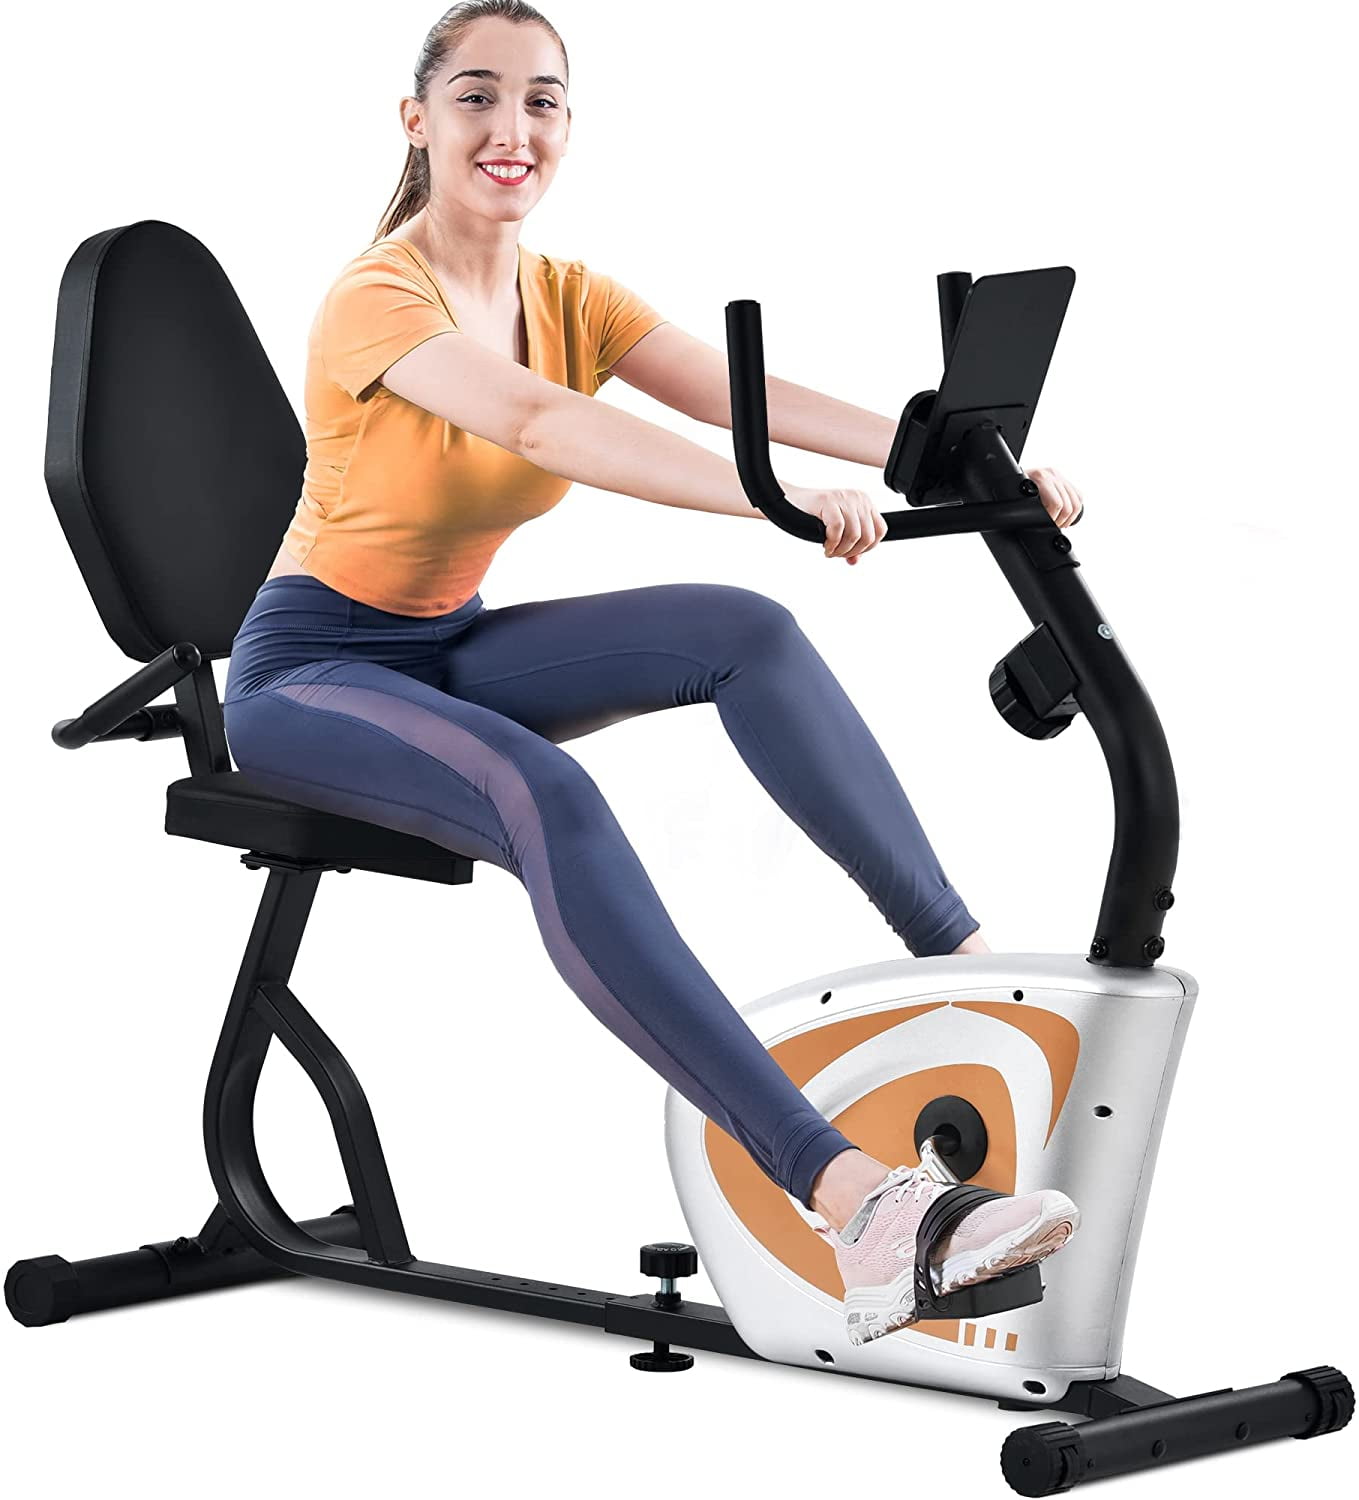 Details about   Bicycle Bike Fitness Gym Exercise Stationary Bike Aerobics Family Indoor 